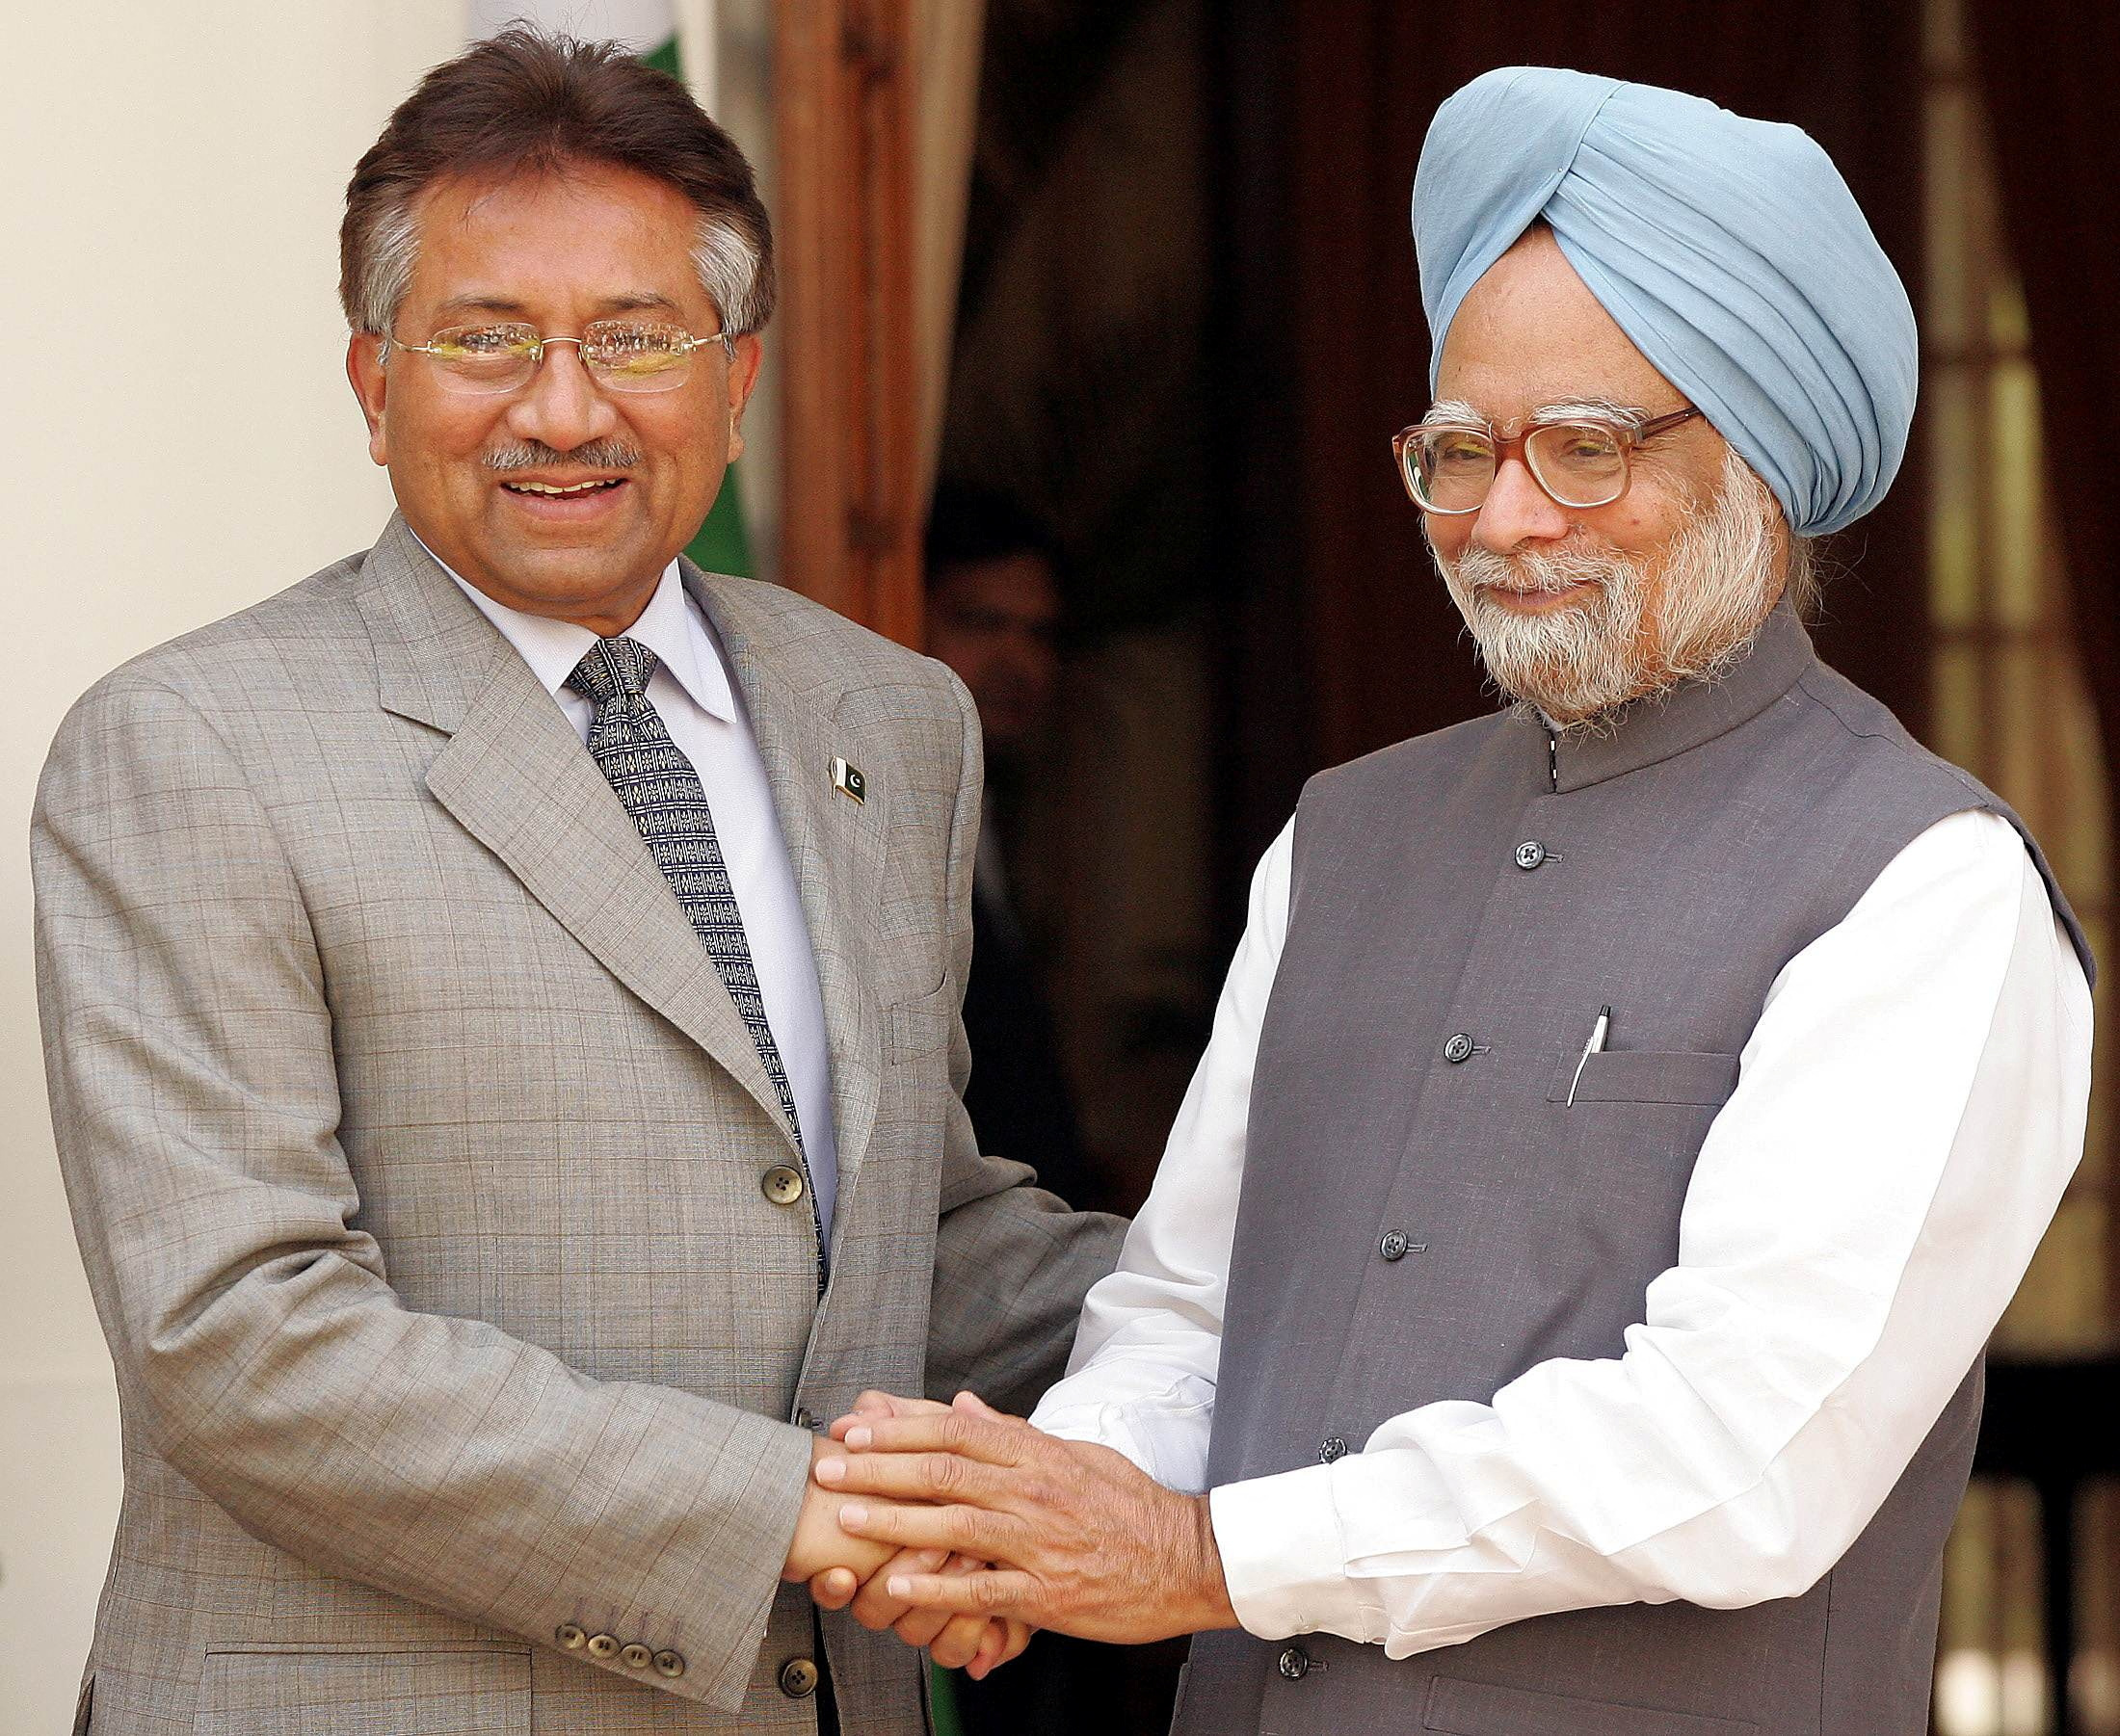 Pakistan's President Musharraf shakes hands with Indian Prime Minister Singh in New Delhi.